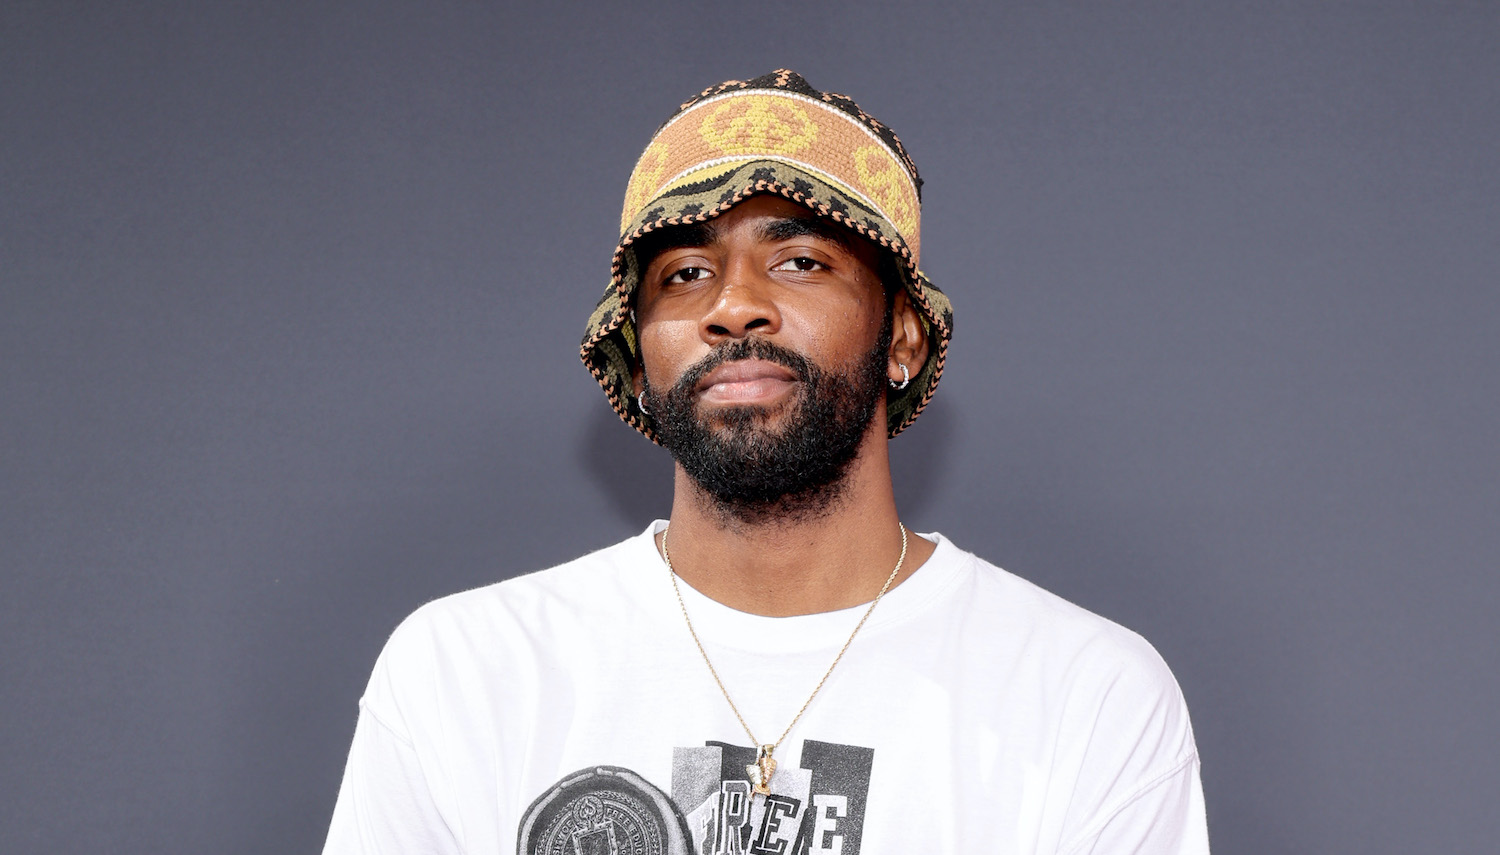 LOS ANGELES, CALIFORNIA - JUNE 26: Kyrie Irving attends the 2022 BET Awards at Microsoft Theater on June 26, 2022 in Los Angeles, California. (Photo by Amy Sussman/Getty Images,)